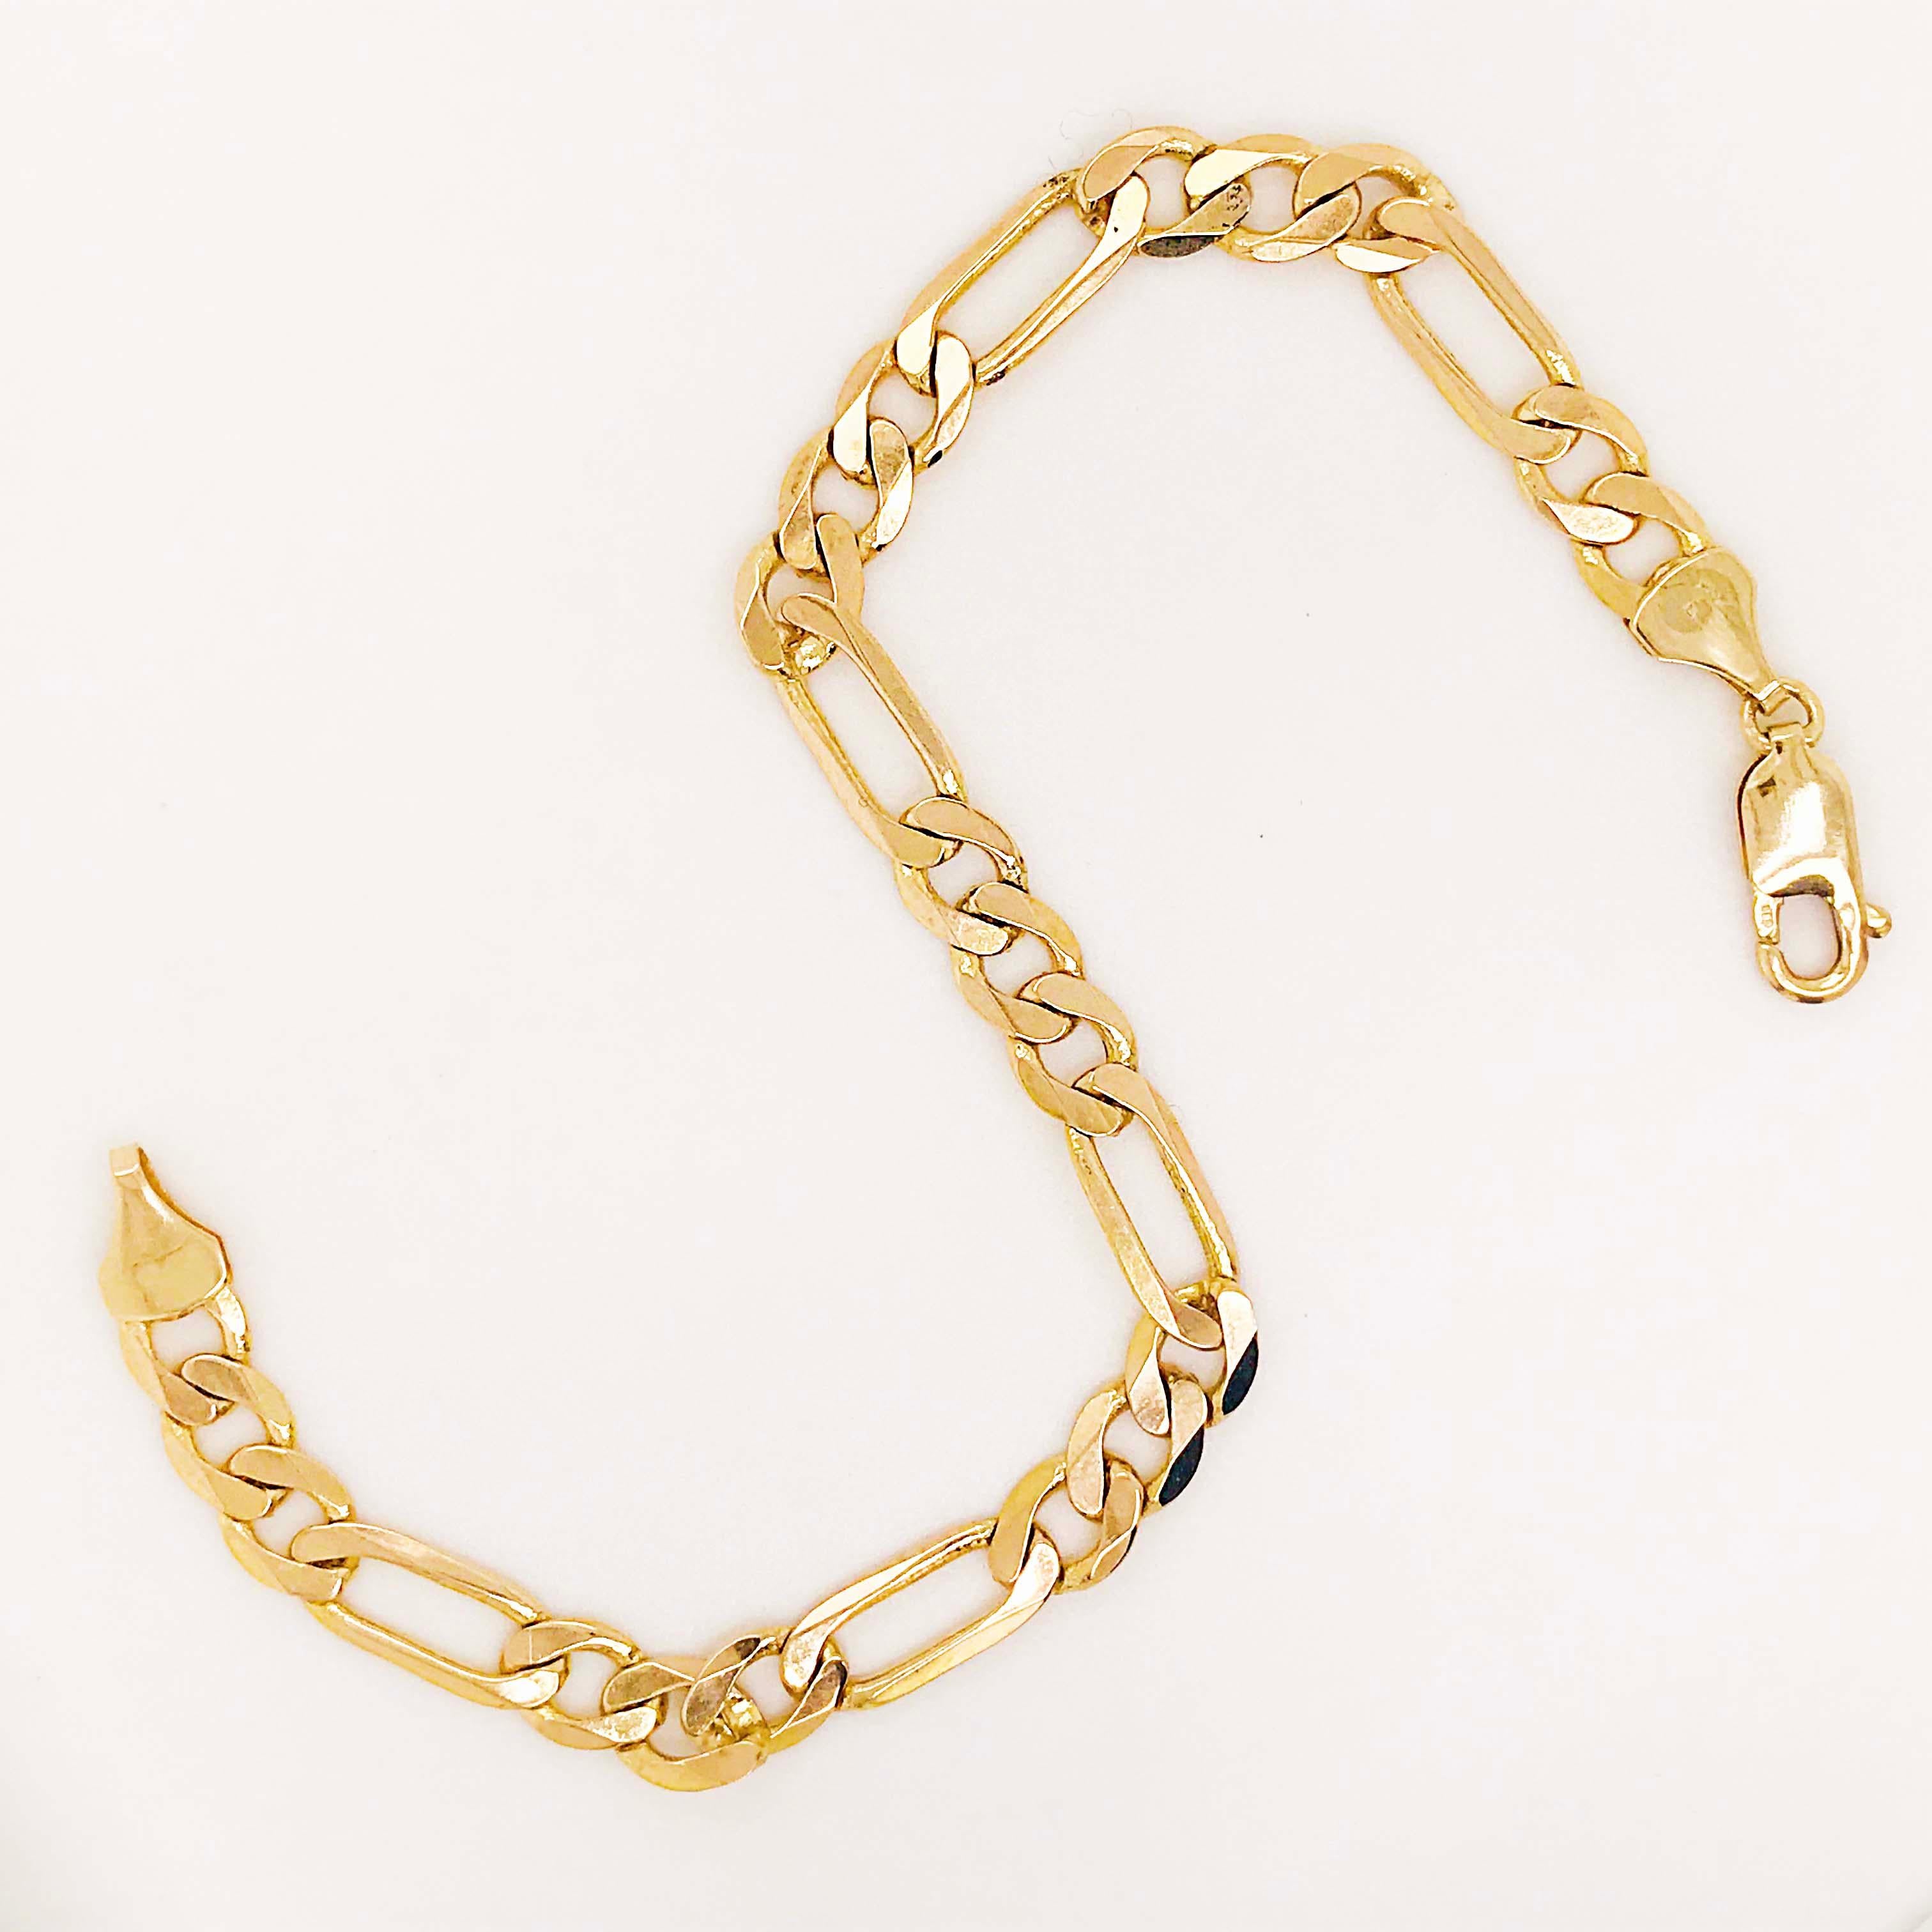 Heavy Figaro Chain Link Bracelet and Large Clasp, 14 Karat Gold 8 Inches Long 2